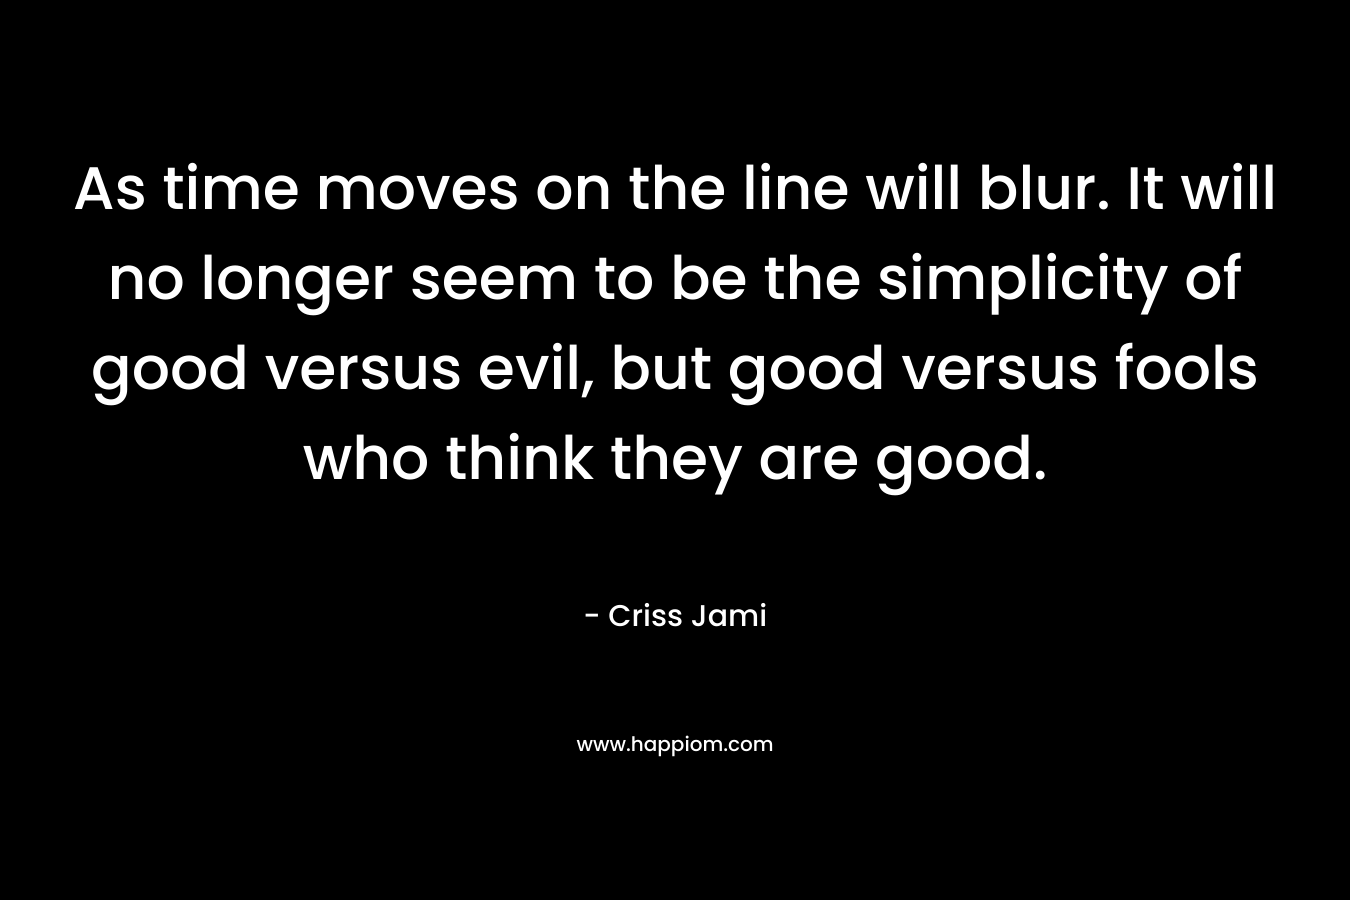 As time moves on the line will blur. It will no longer seem to be the simplicity of good versus evil, but good versus fools who think they are good.